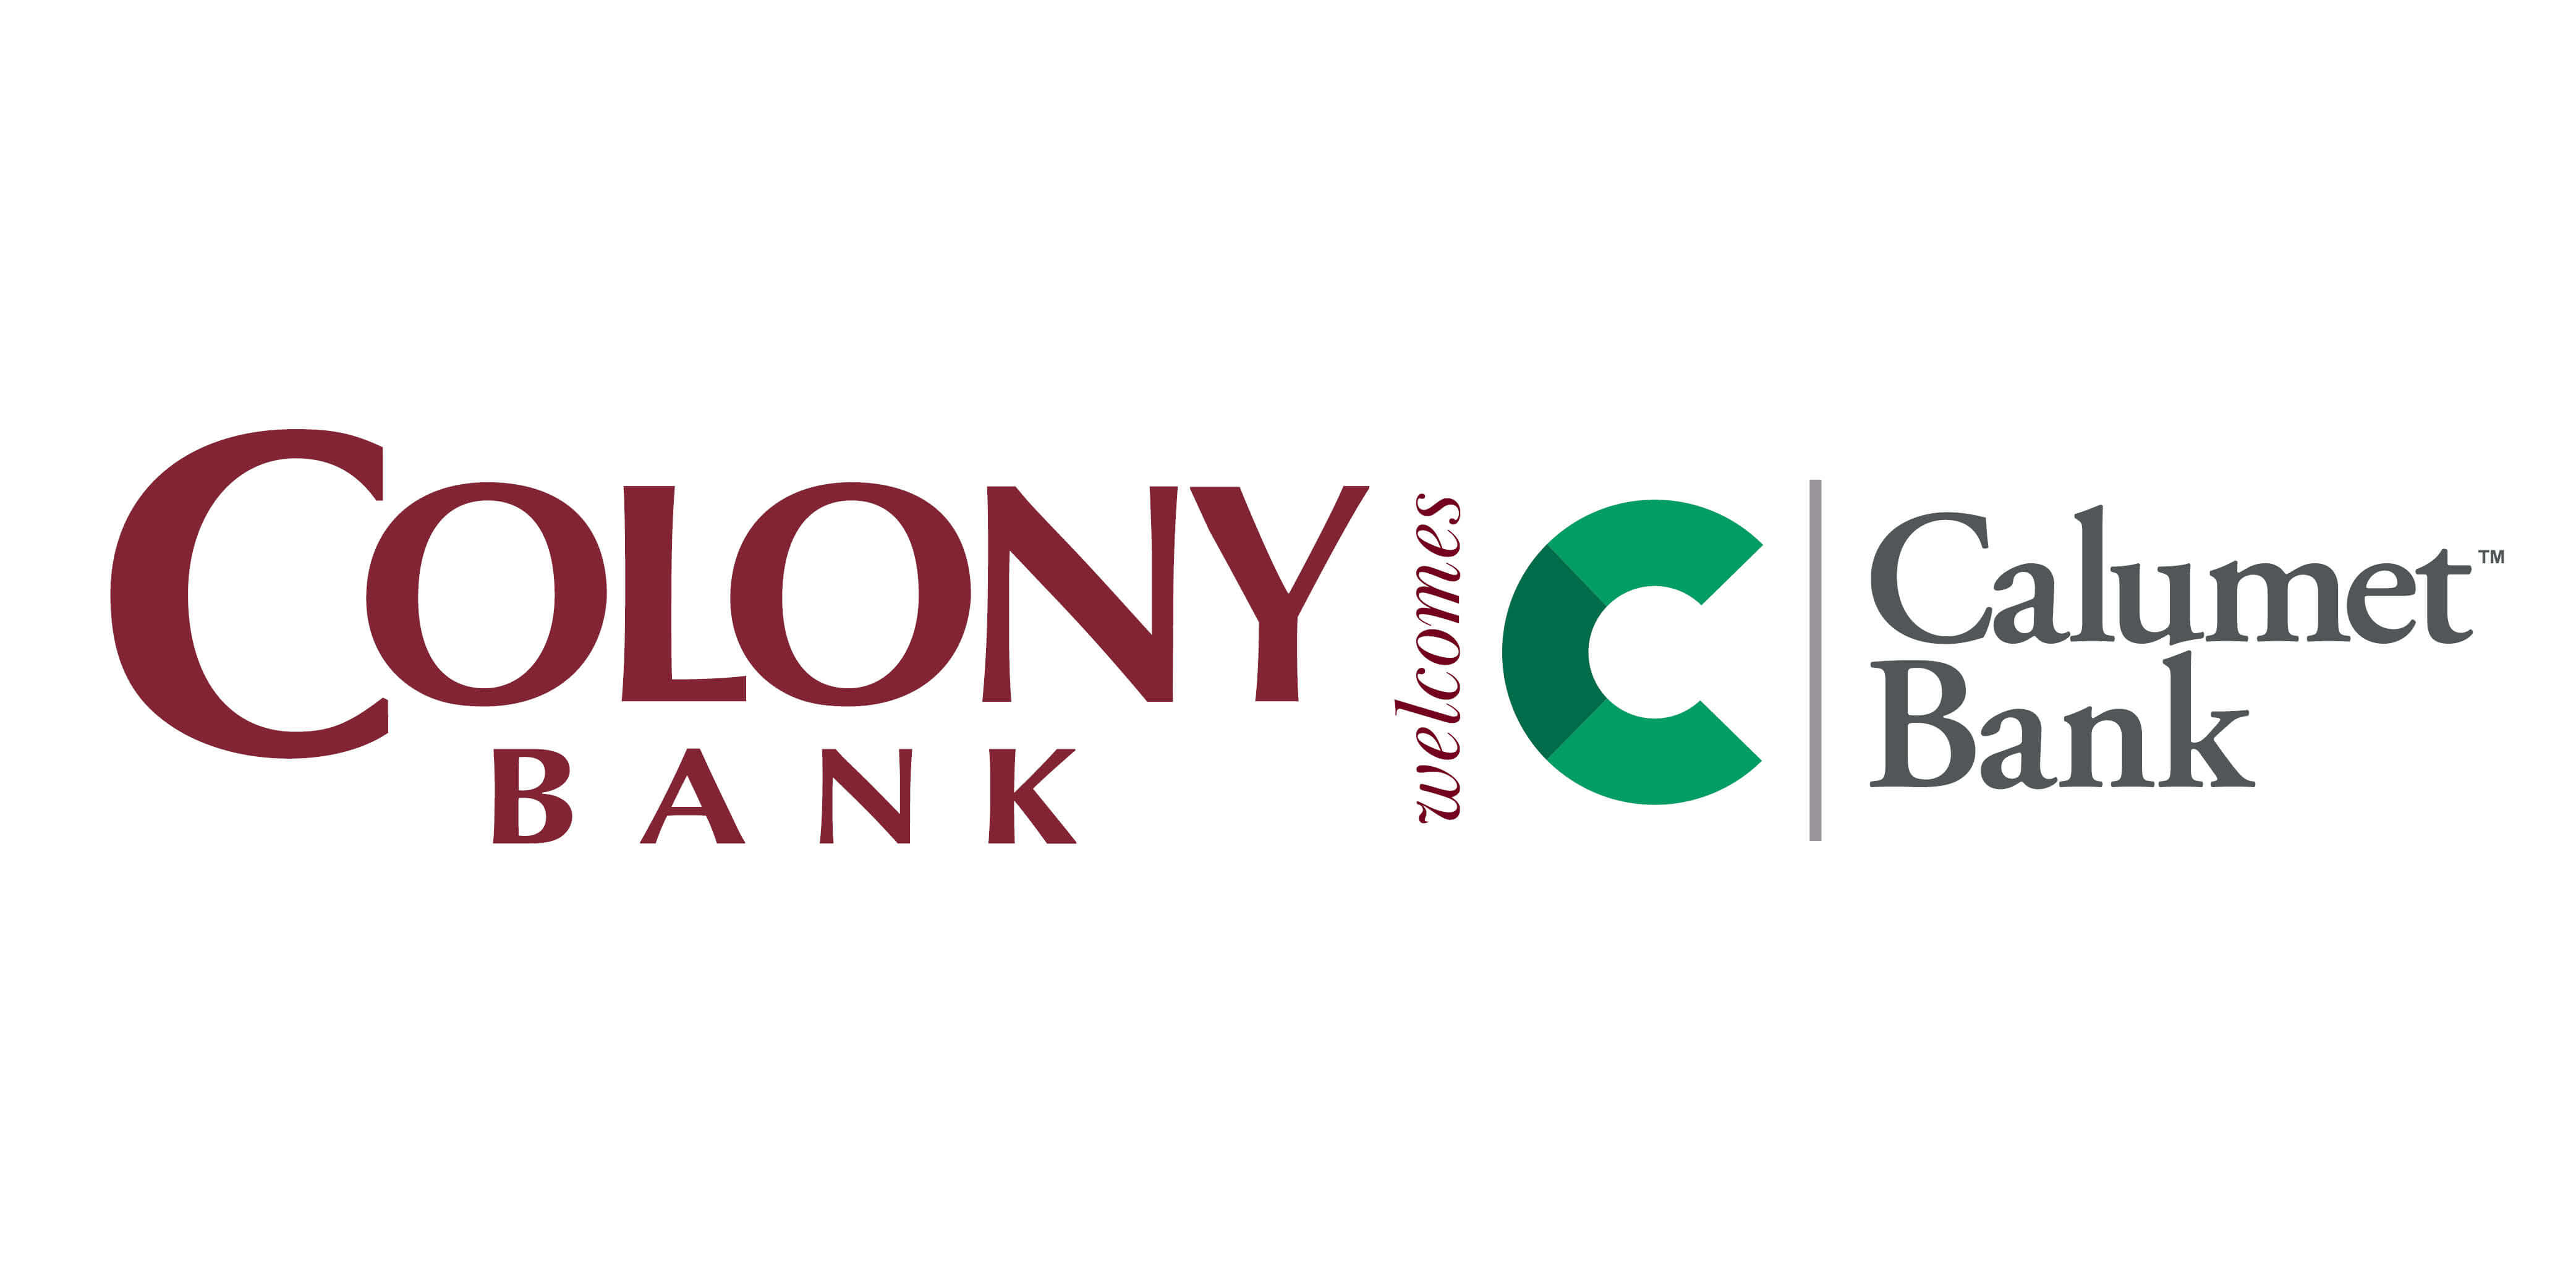 Calumet Logo - Understand the Merger with Colony Bank - Calumet Bank | Calumet Bank